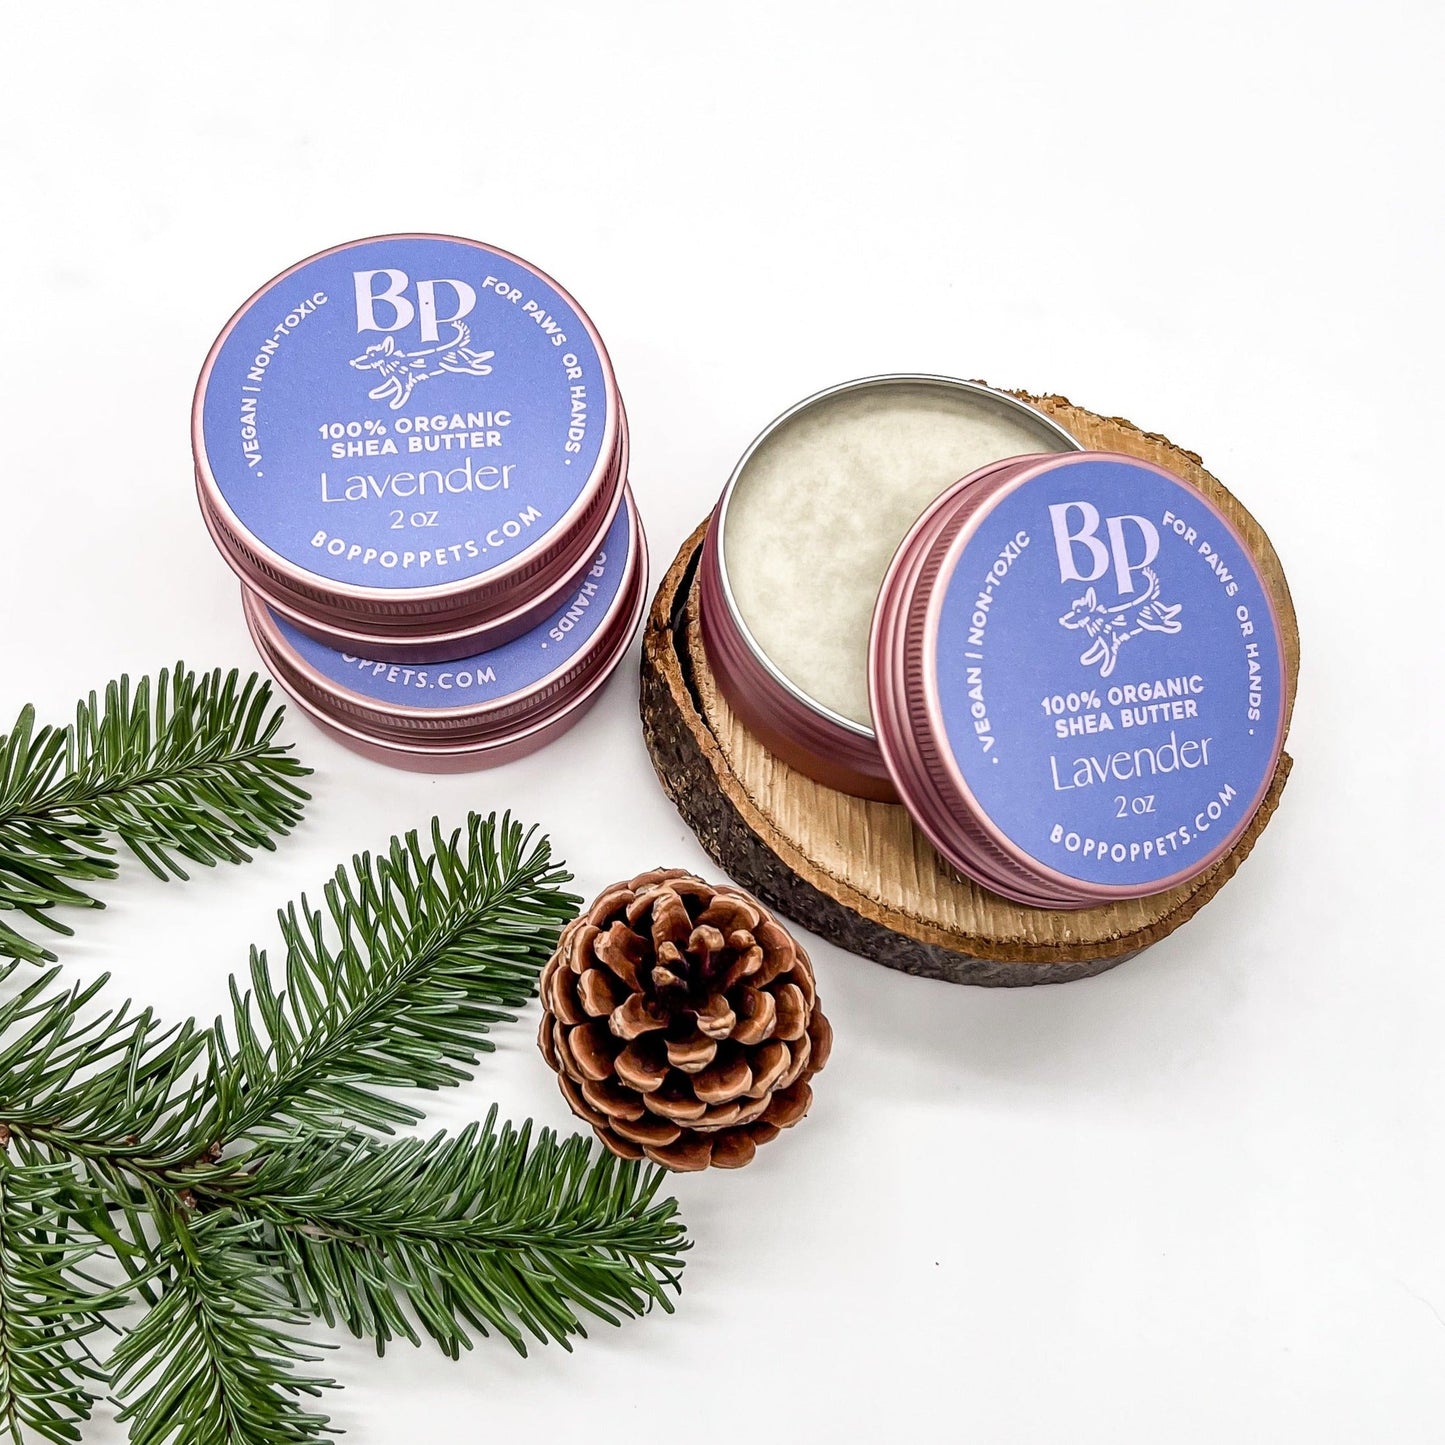 Shea butter lavender paw balm bop pop pets tin for dry cracked dog paws winter hands pet accessories 2 oz non-toxic vegan organic